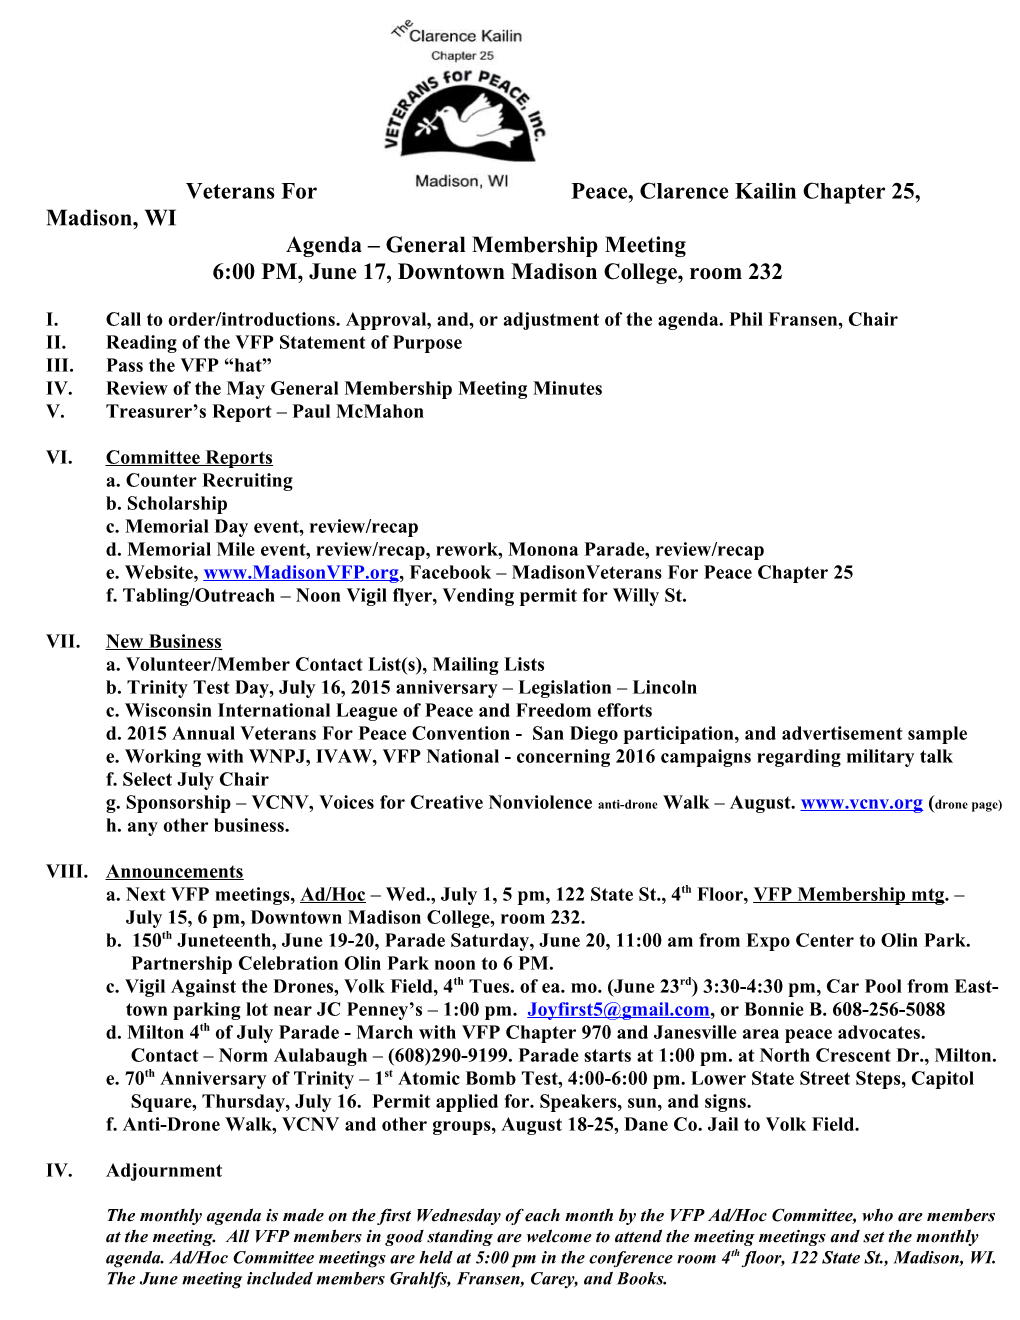 Veterans for Peace, Clarence Kailin Chapter 25, Madison, WI